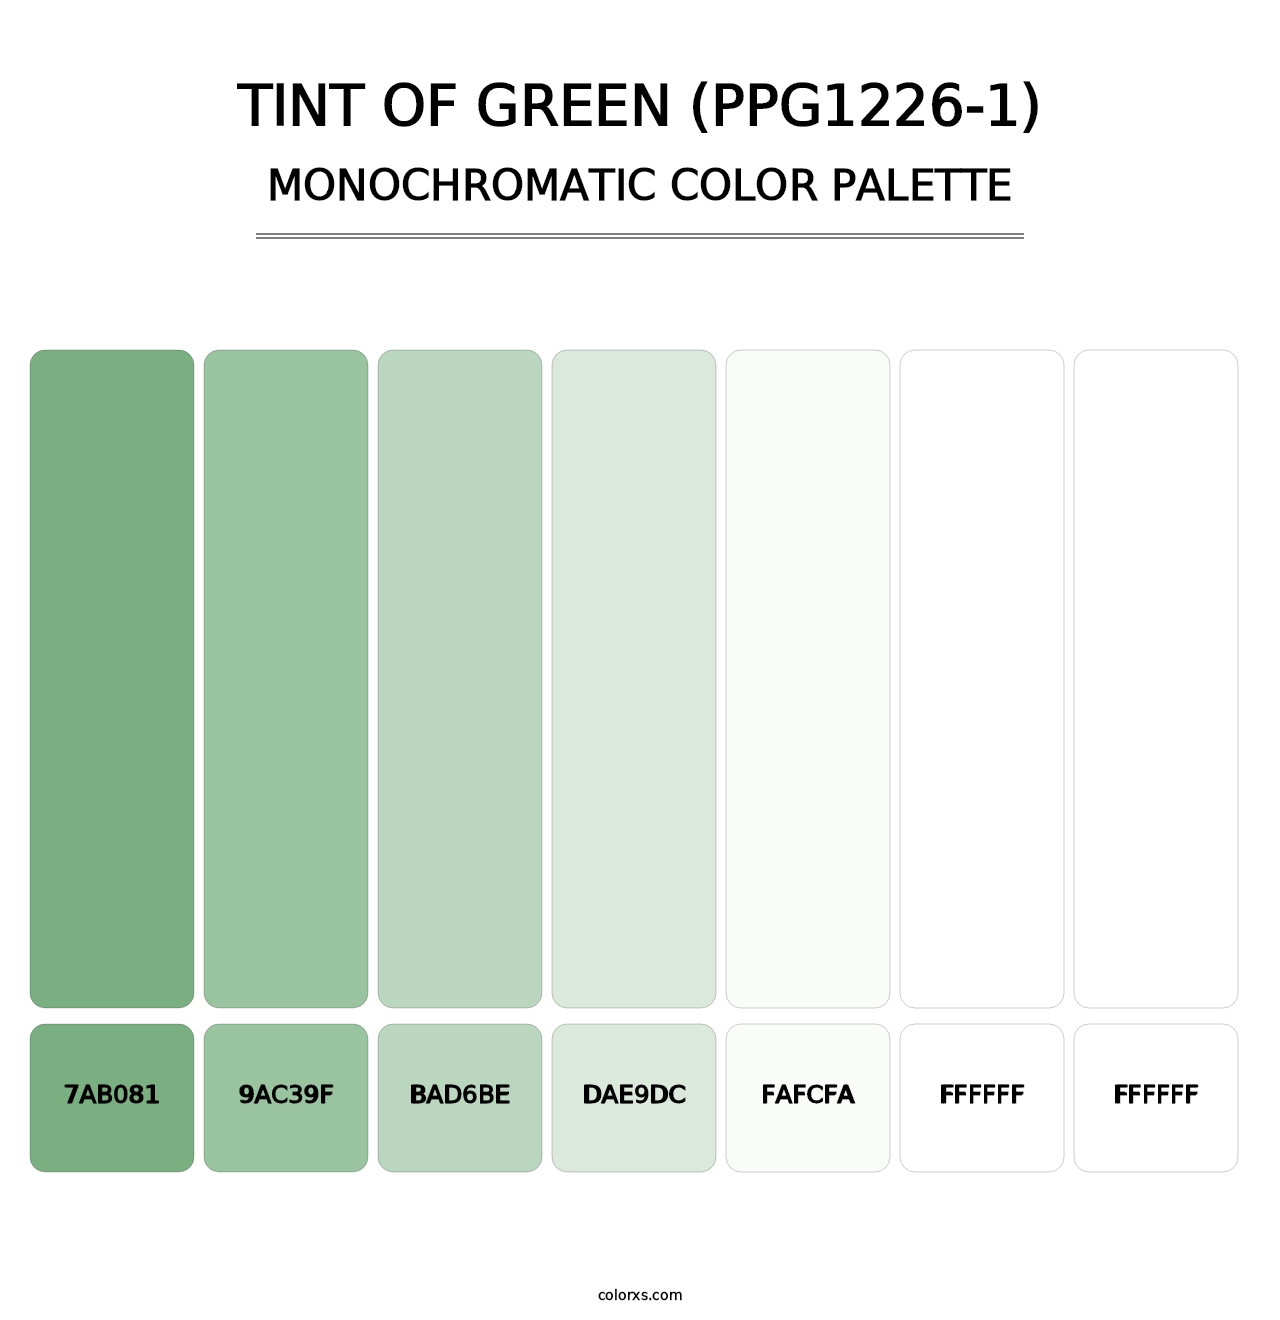 Tint Of Green (PPG1226-1) - Monochromatic Color Palette